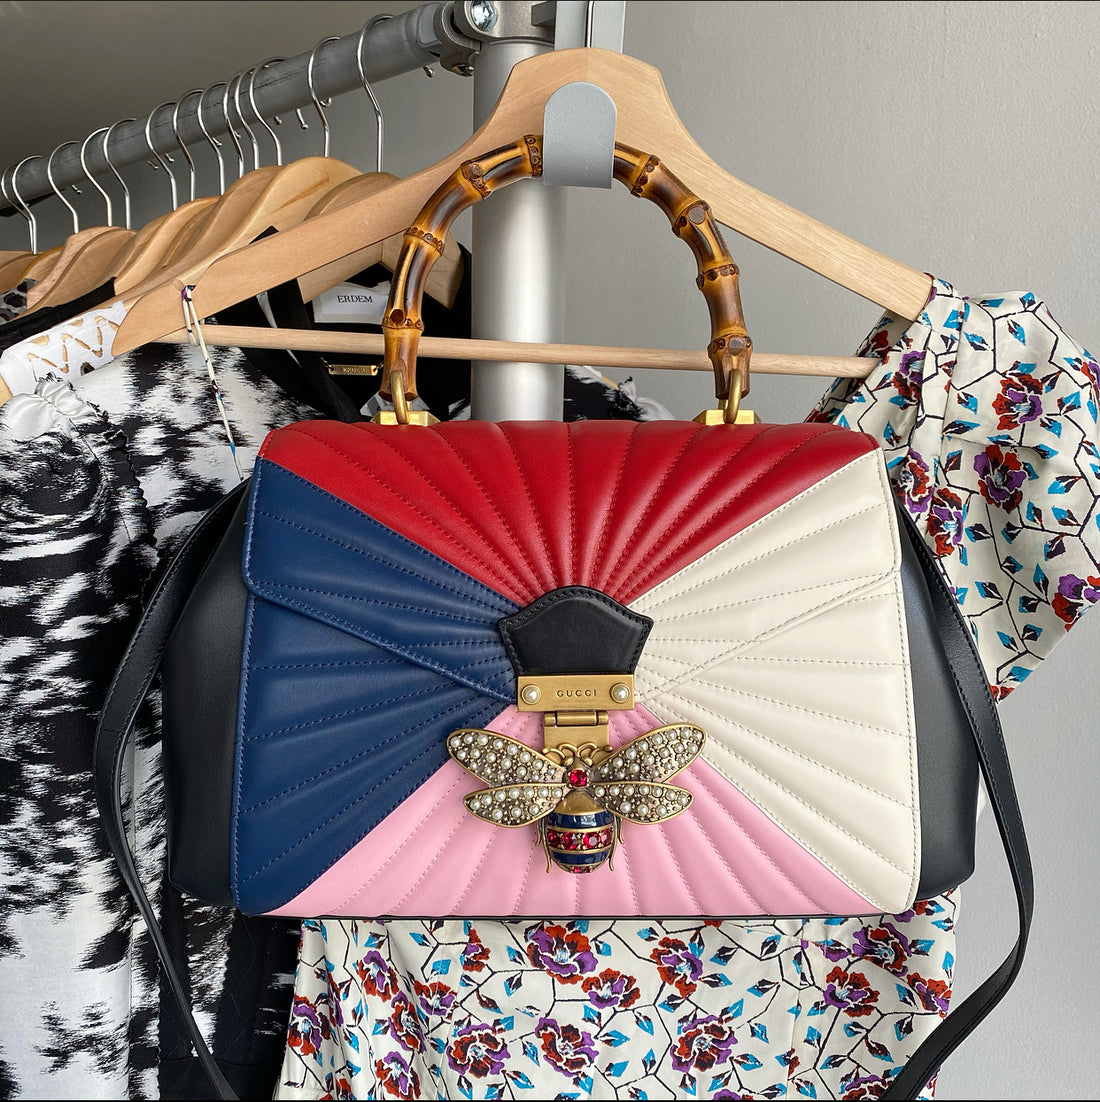 Gucci Pink Navy White Bamboo Queen Margaret Medium Bag.  Original retail $3400 USD / $4150 CAD.  Pleated leather bag in pink, navy, and white, with bamboo handle, leather shoulder strap, and jewelled bee clasp.  Medium size measuring 12.5 x 8.25 x 3.75” with an 18.25” strap drop.  Excellent condition - appears to be brand new and uncarried.  Includes duster, box, strap, clochette, care pamphlet, controllato paper, leather swatch, protective packaging, and Entrupy certificate of authenticity.